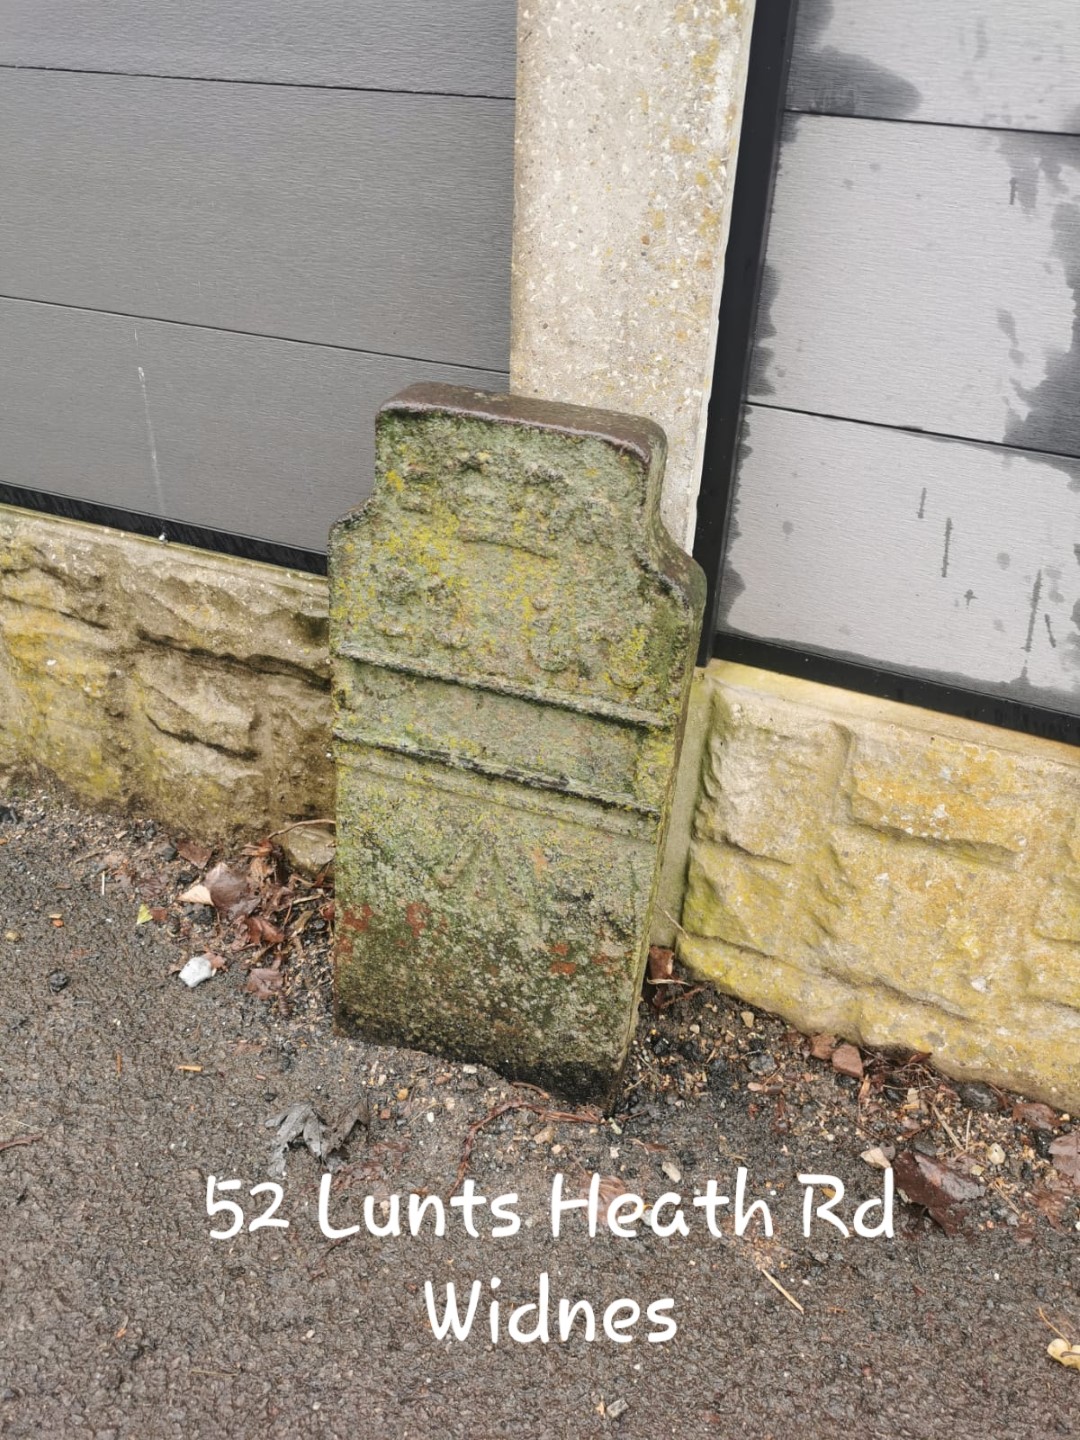 Telegraph cable marker post at 52 Lunts Heath Road, Lunts Heath, Widnes by Jan Gibbons 